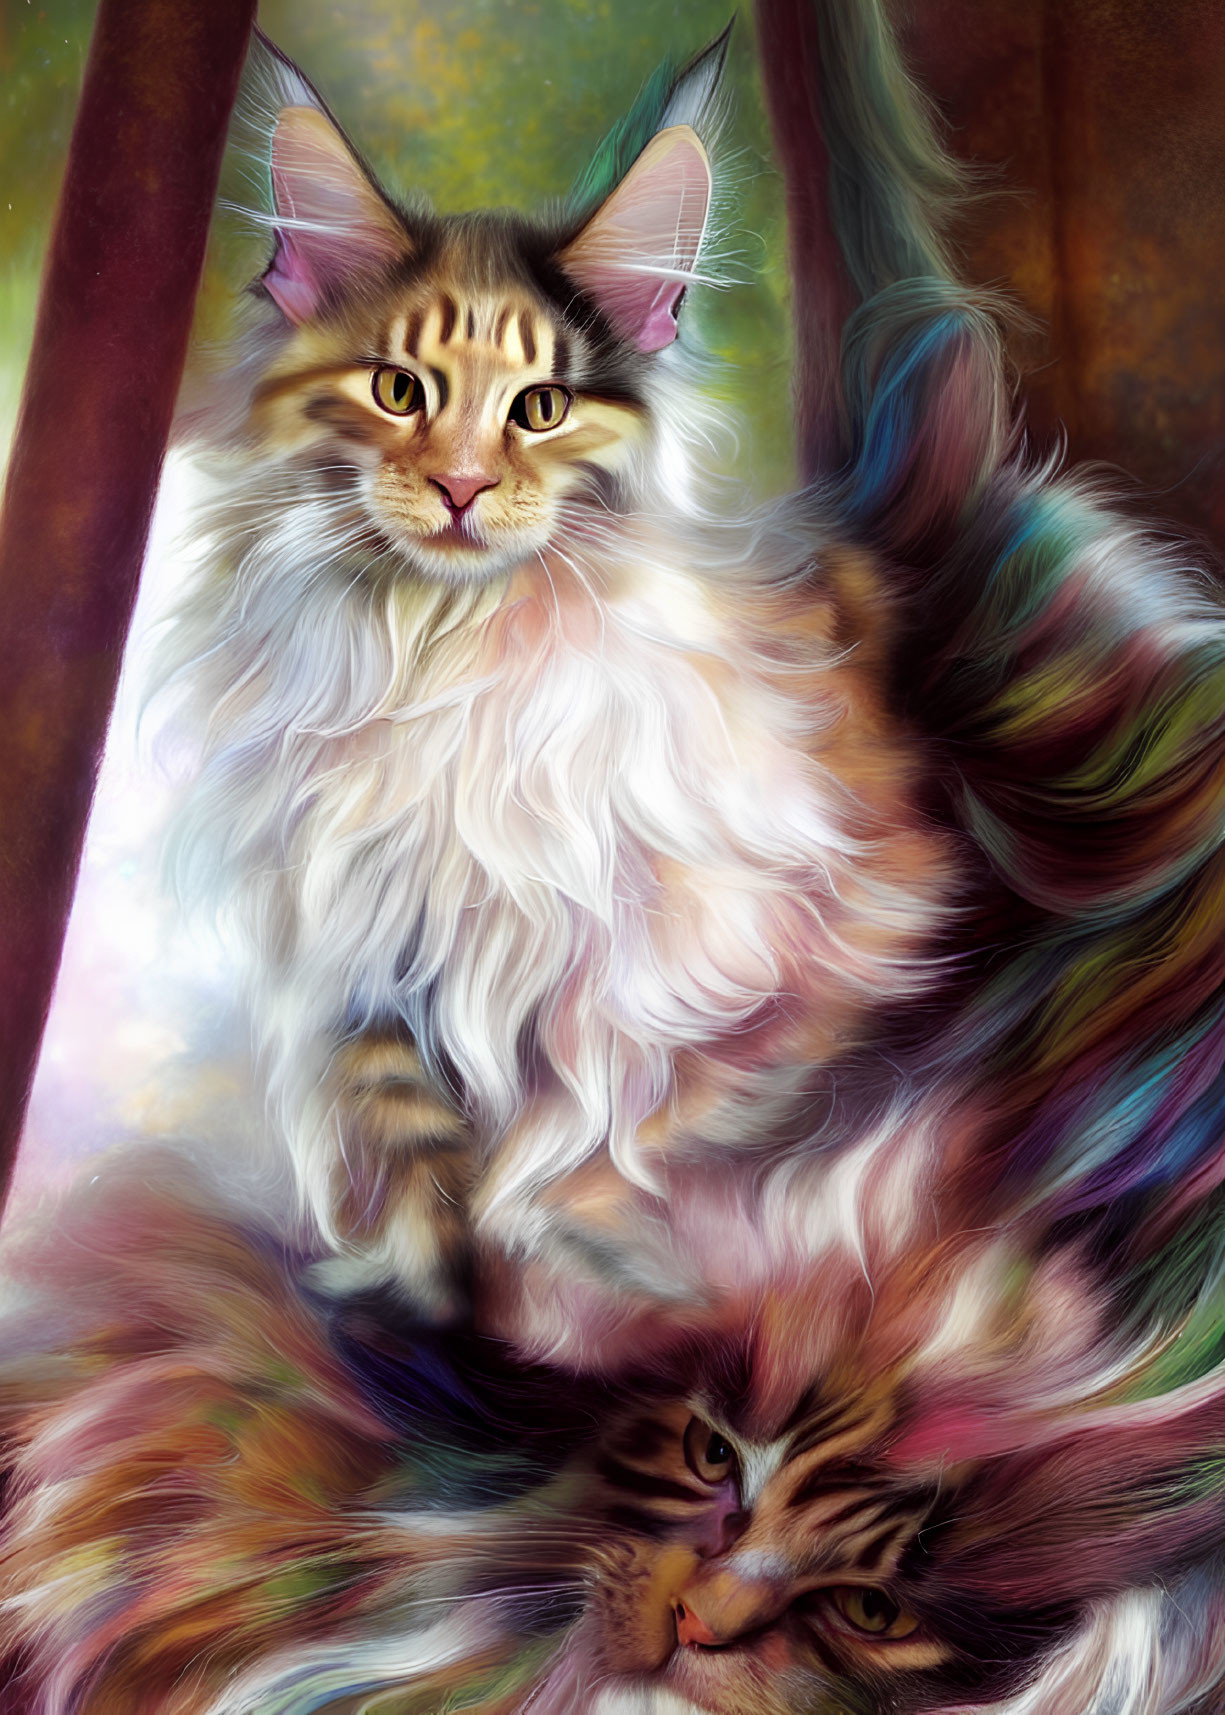 Maine Coon Cat Digital Painting with Striking Amber Eyes